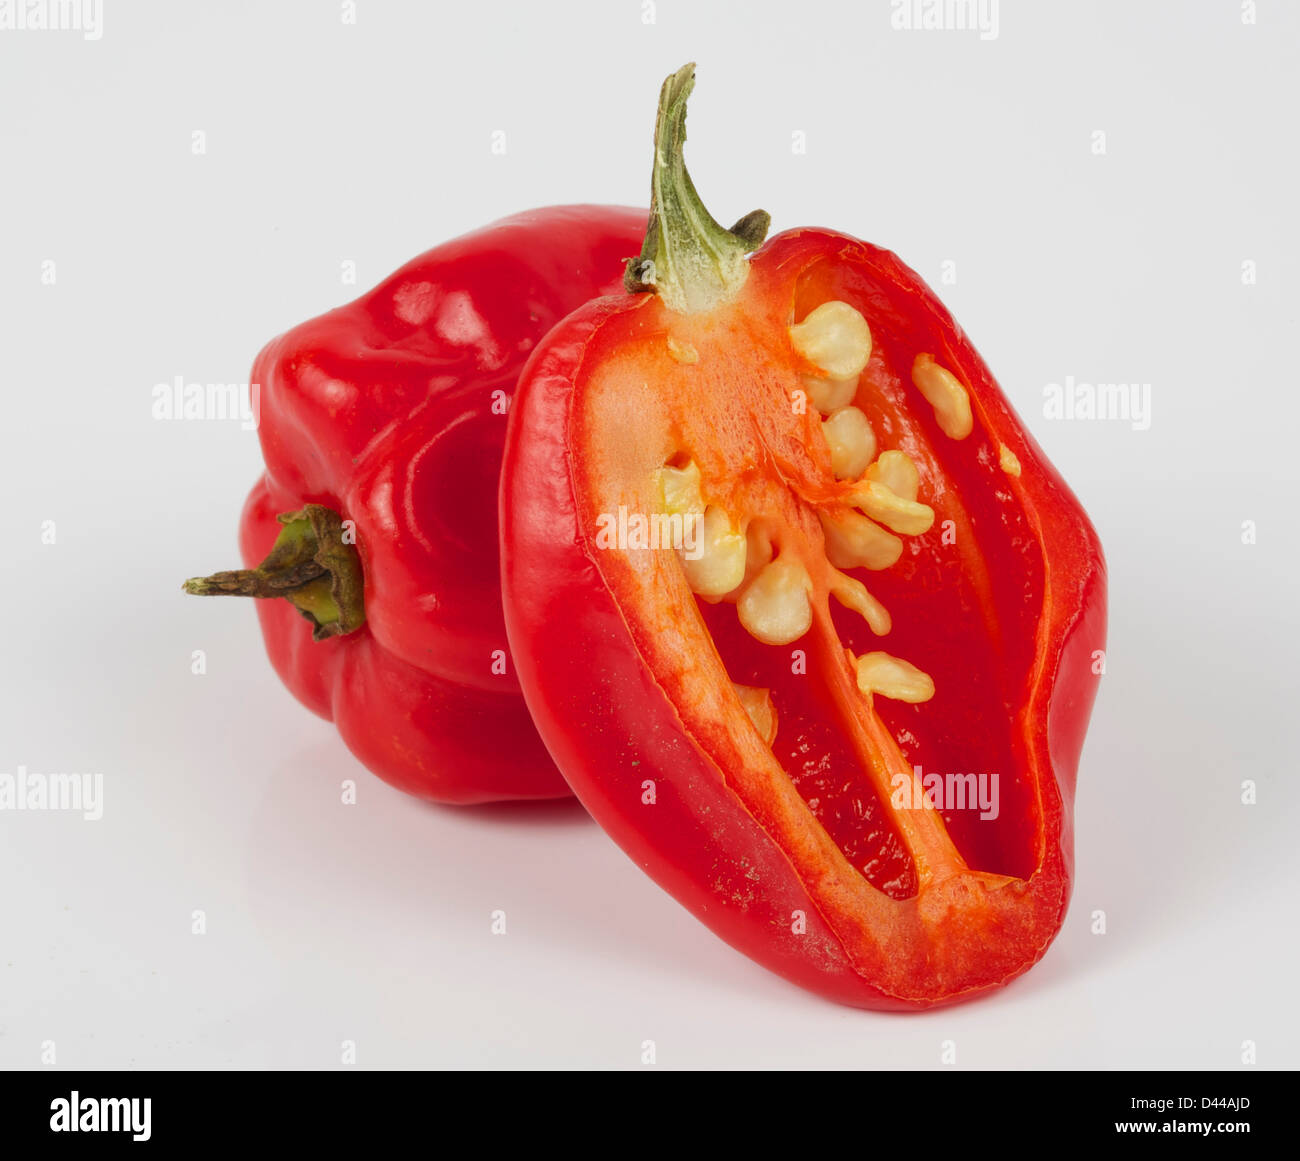 These peppers are used to flavour many different dishes and cuisines.The Scotch bonnet has a sweeter flavour and stouter shape. Stock Photo